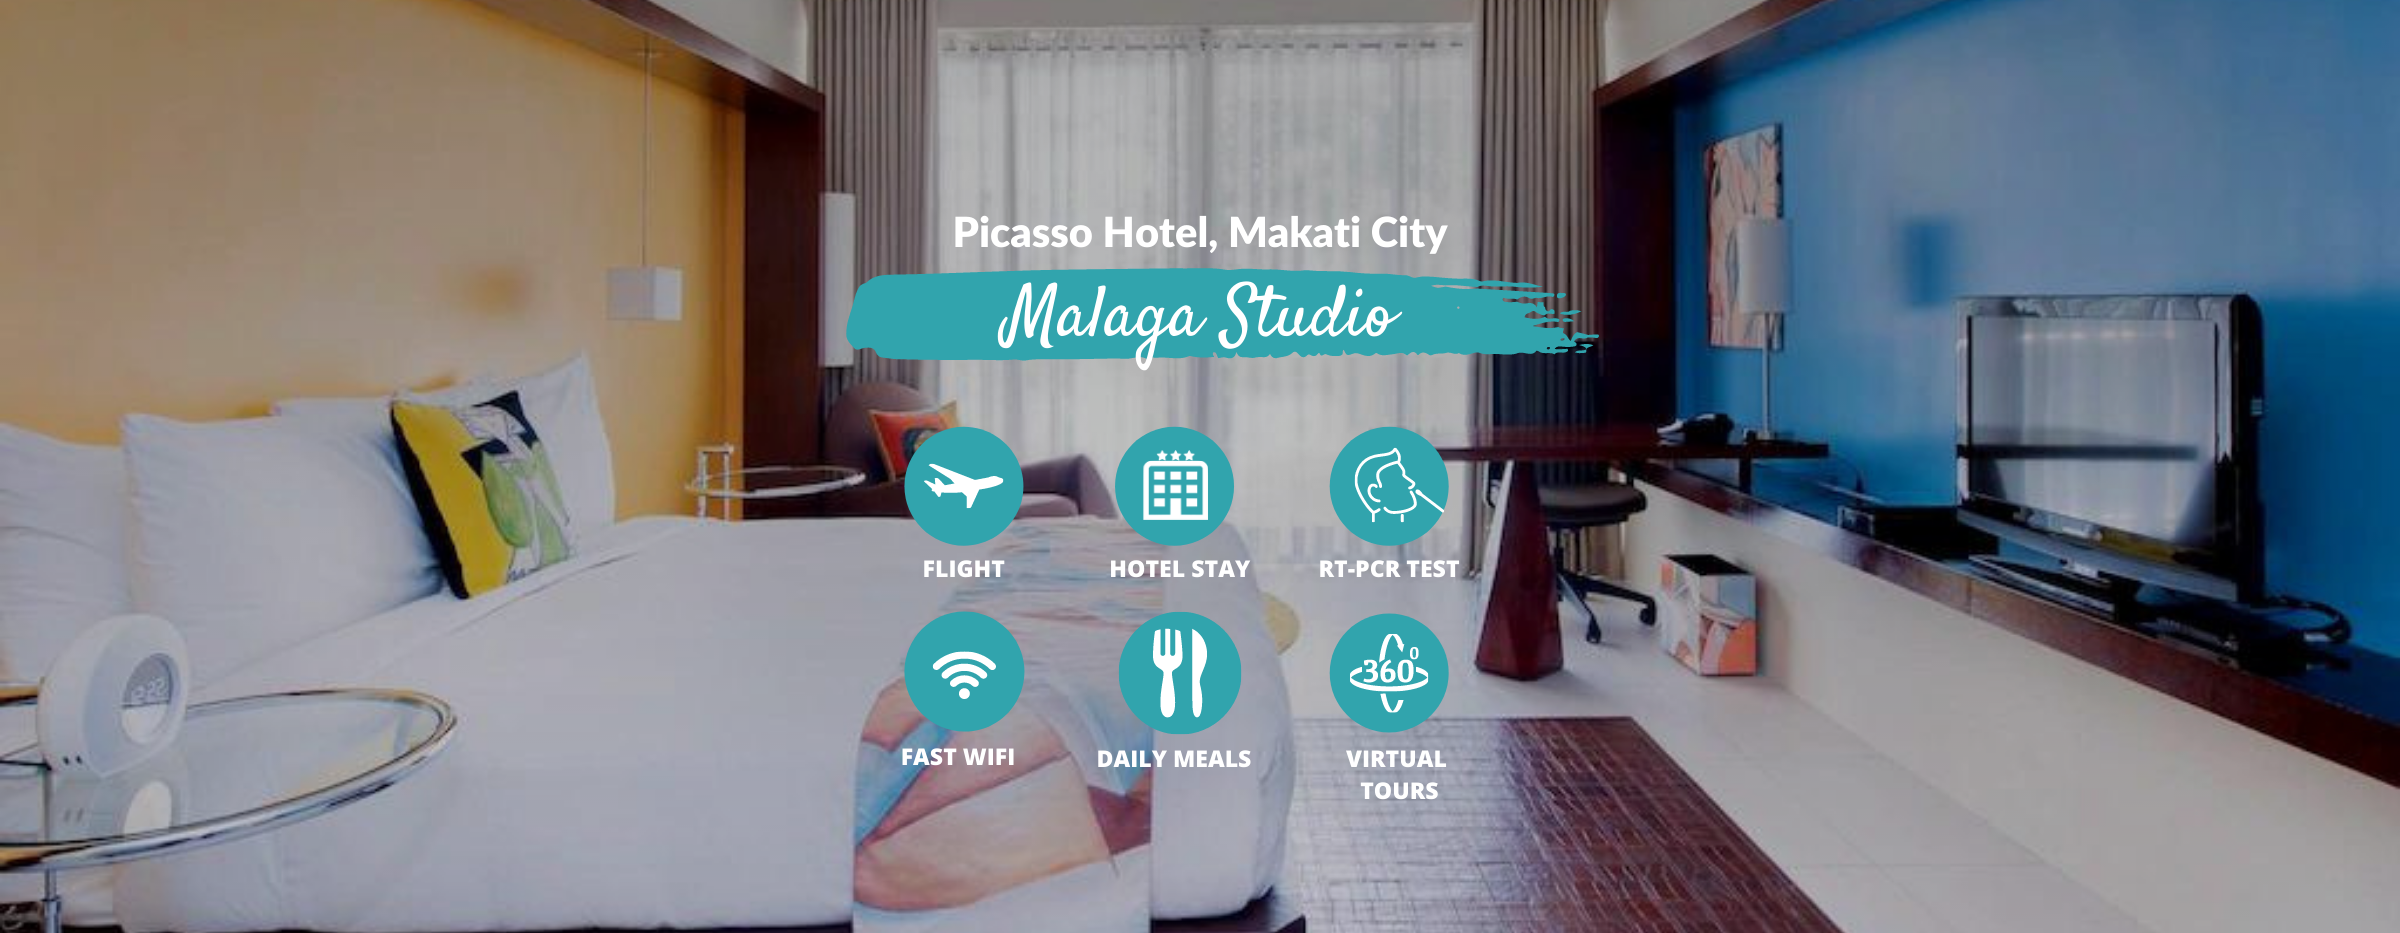 Manila Quarantine from LAX at Picasso Hotel with Philippine Airlines, Meals & Virtual Tours